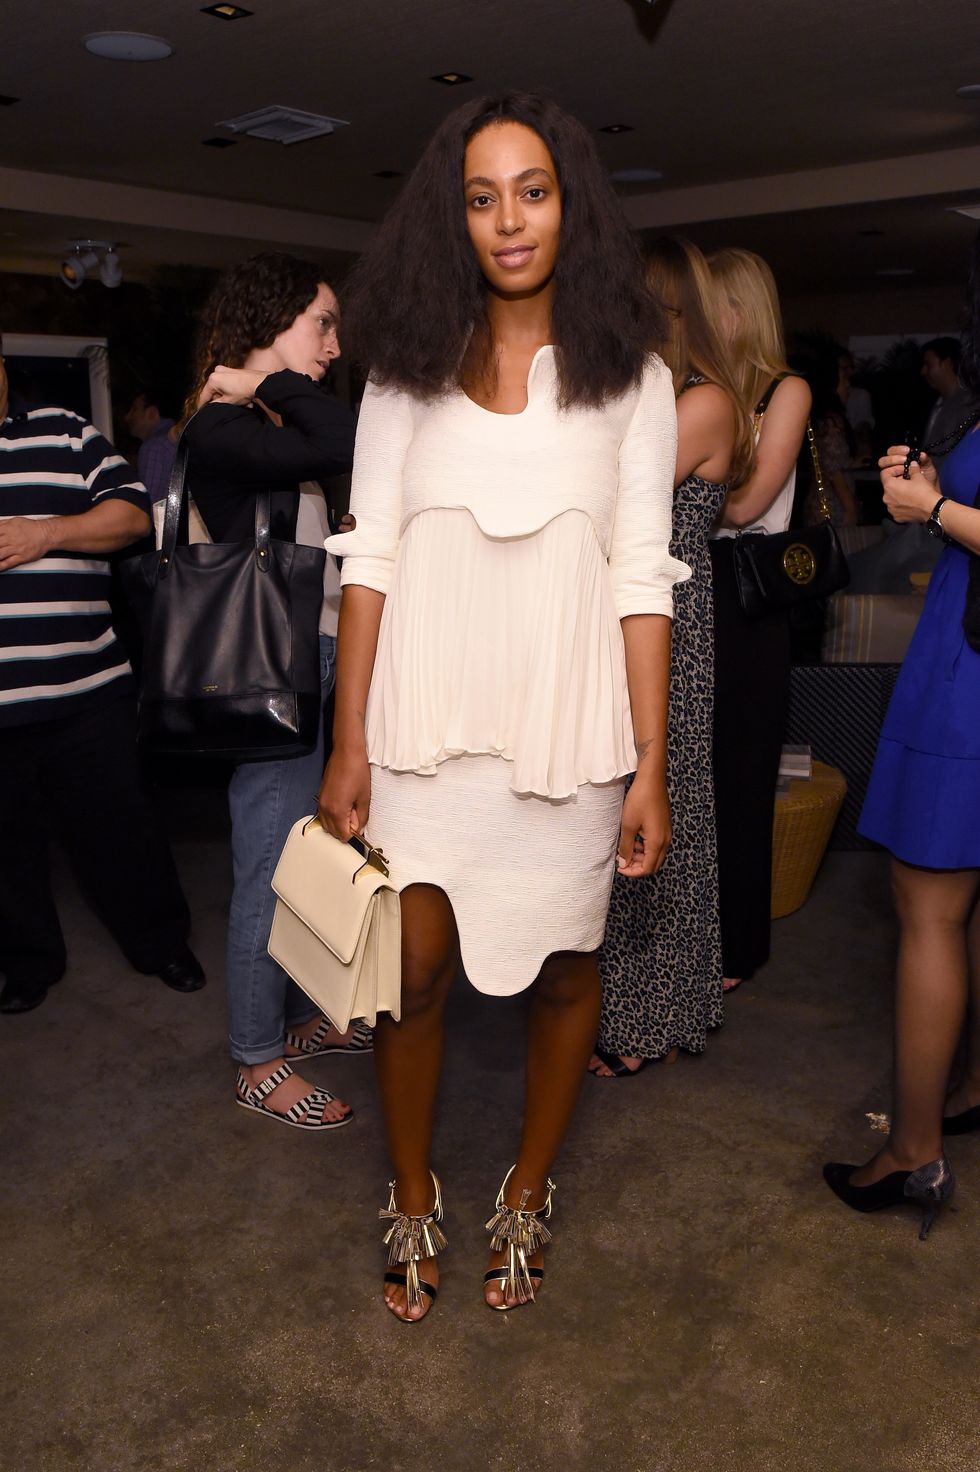 Solange Knowles wears another all white outfit